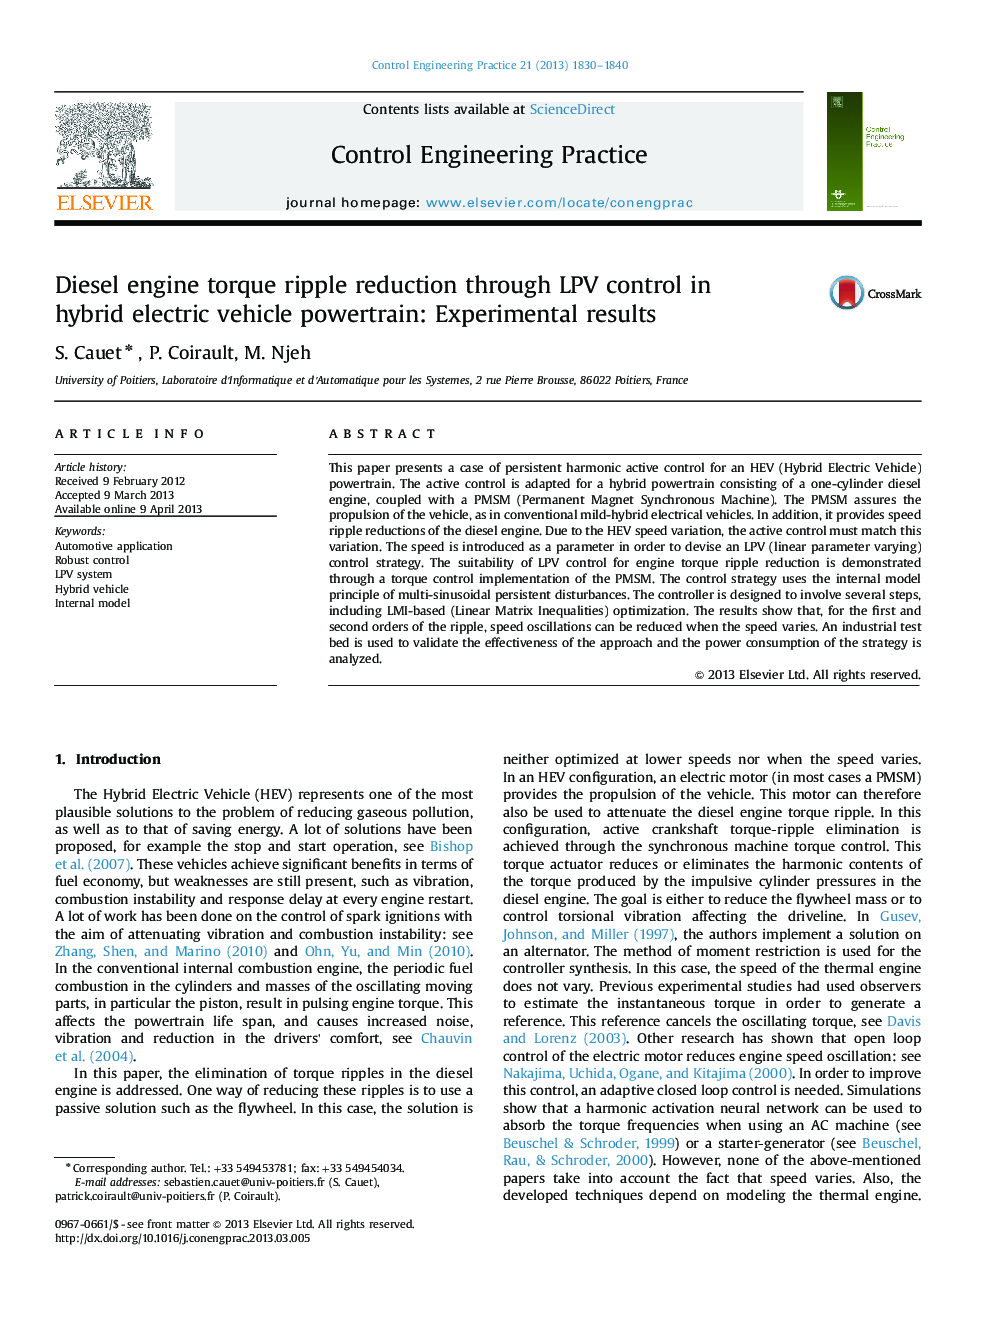 Diesel engine torque ripple reduction through LPV control in hybrid electric vehicle powertrain: Experimental results